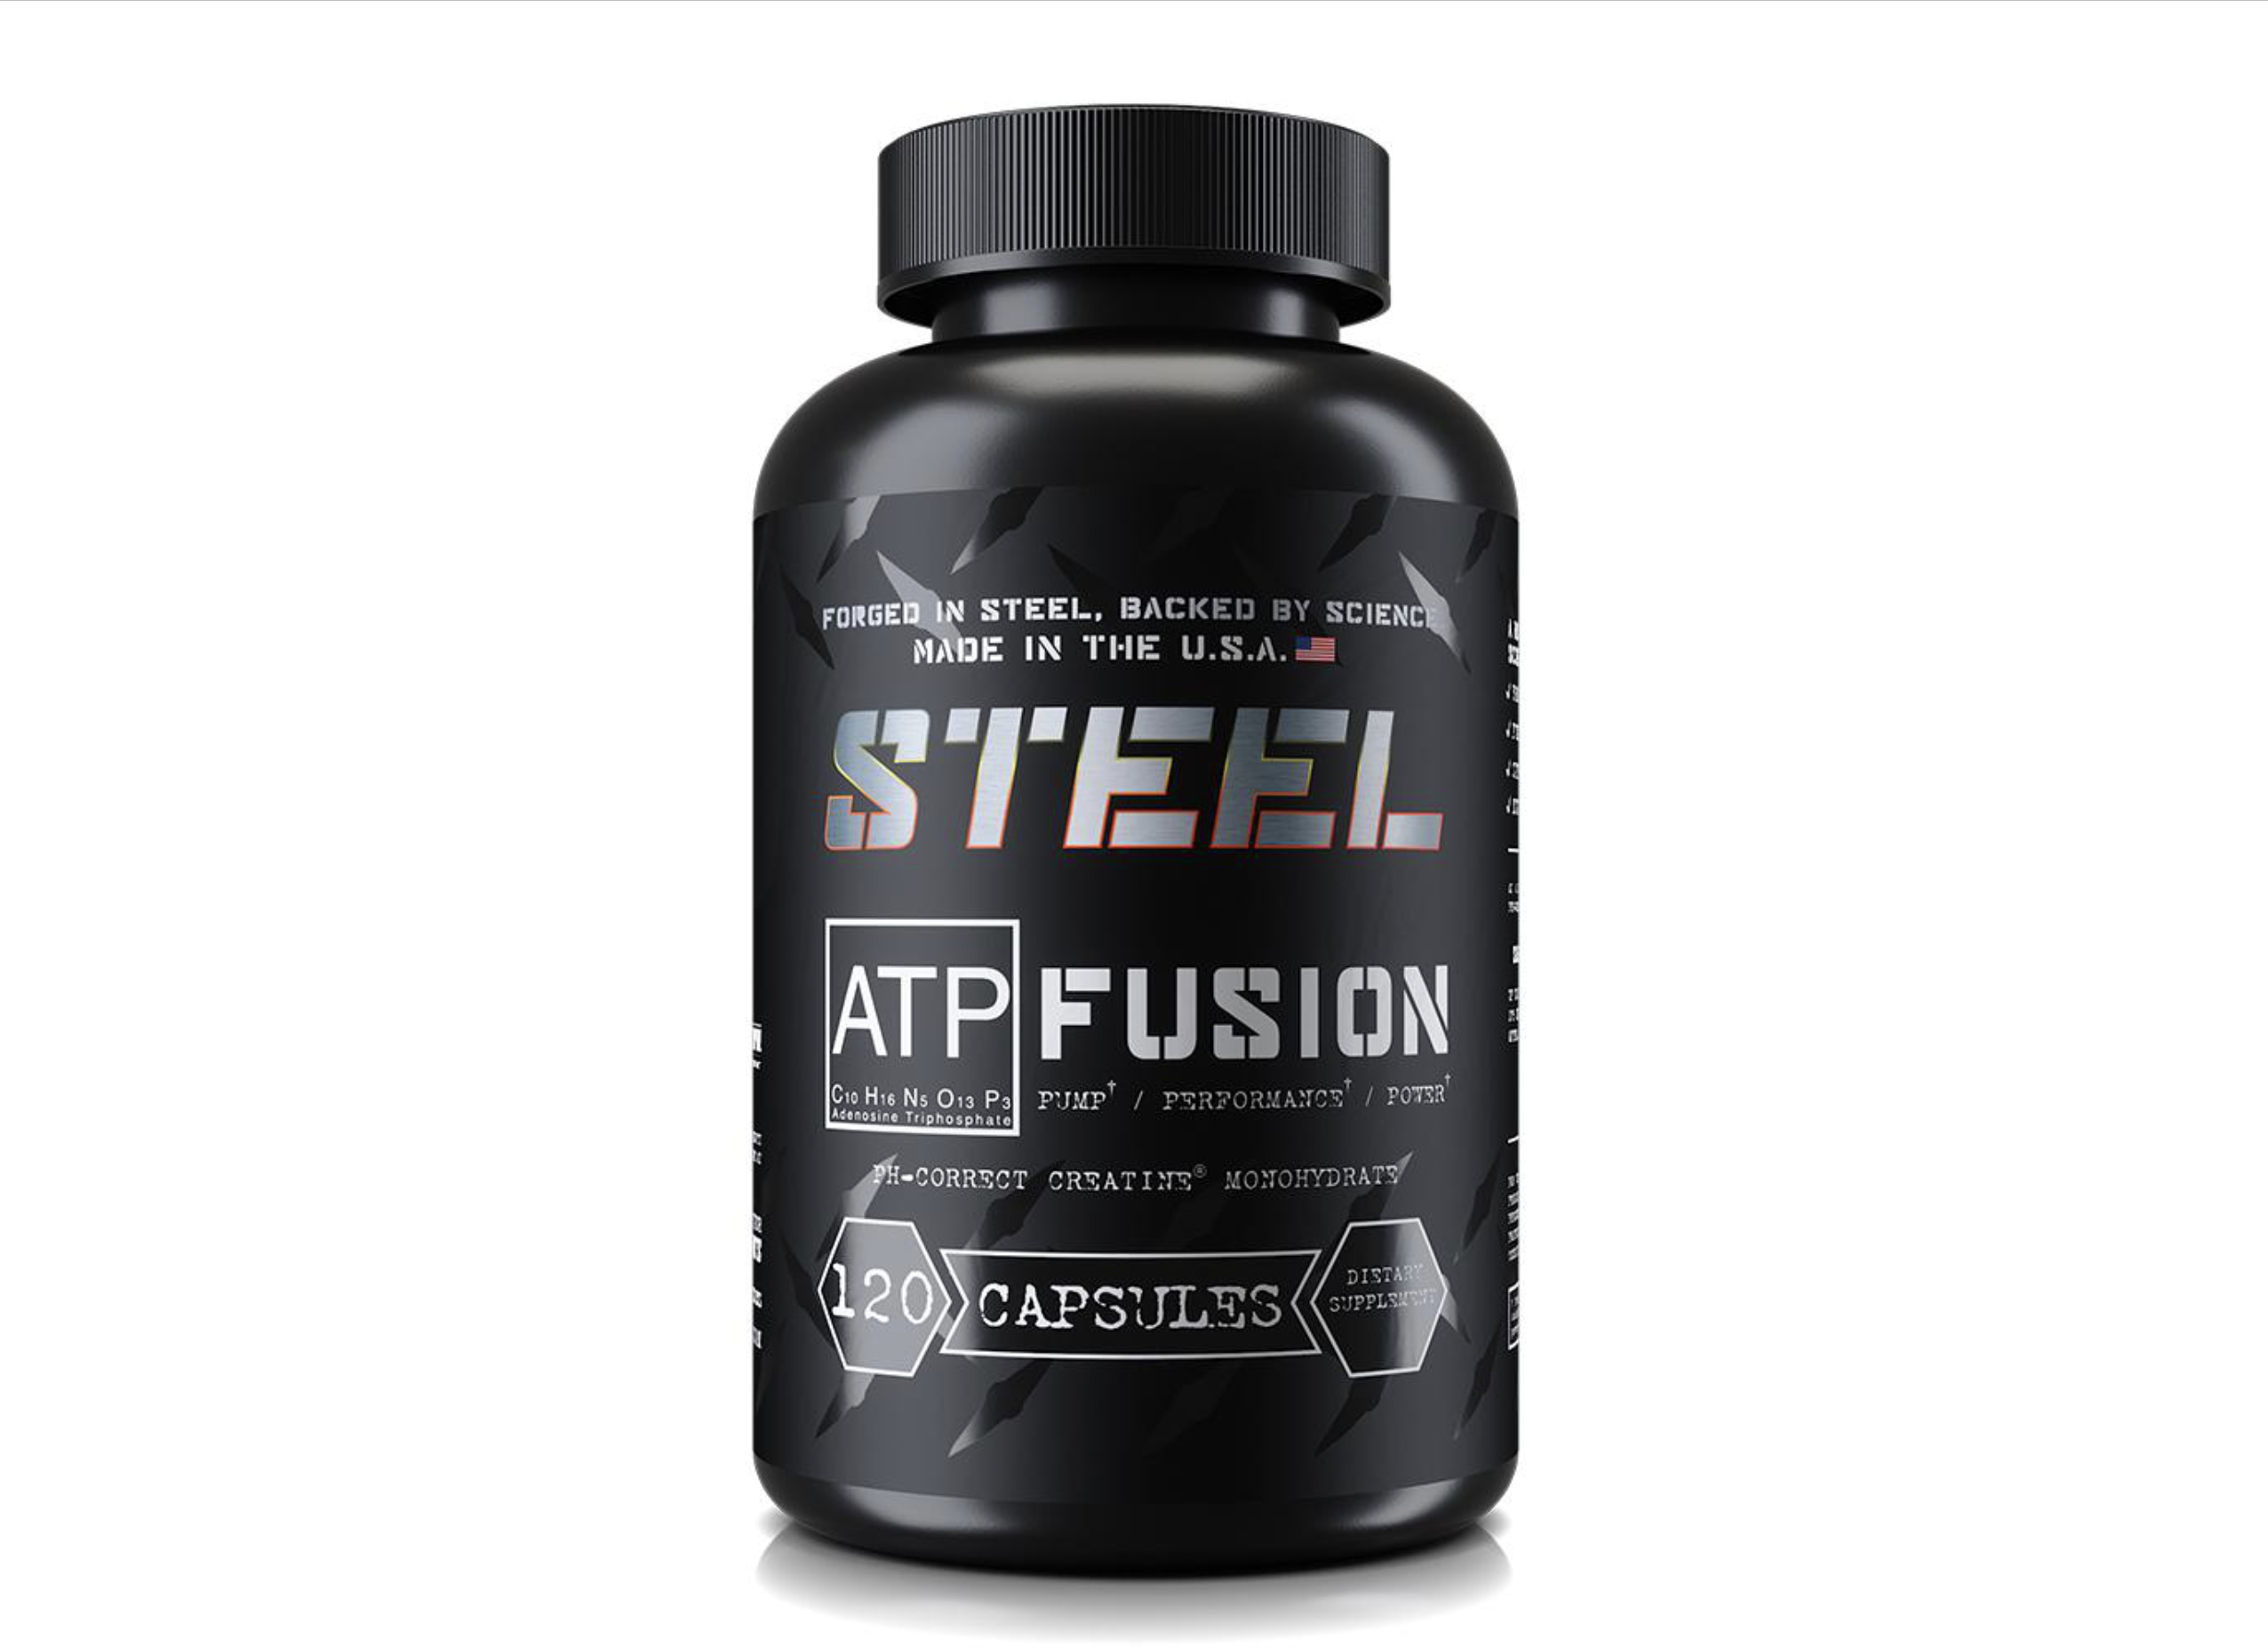 Steel Supplements ATP-FUSION – Muscle Building – Professional Supplements & Protein From A-list Nutrition